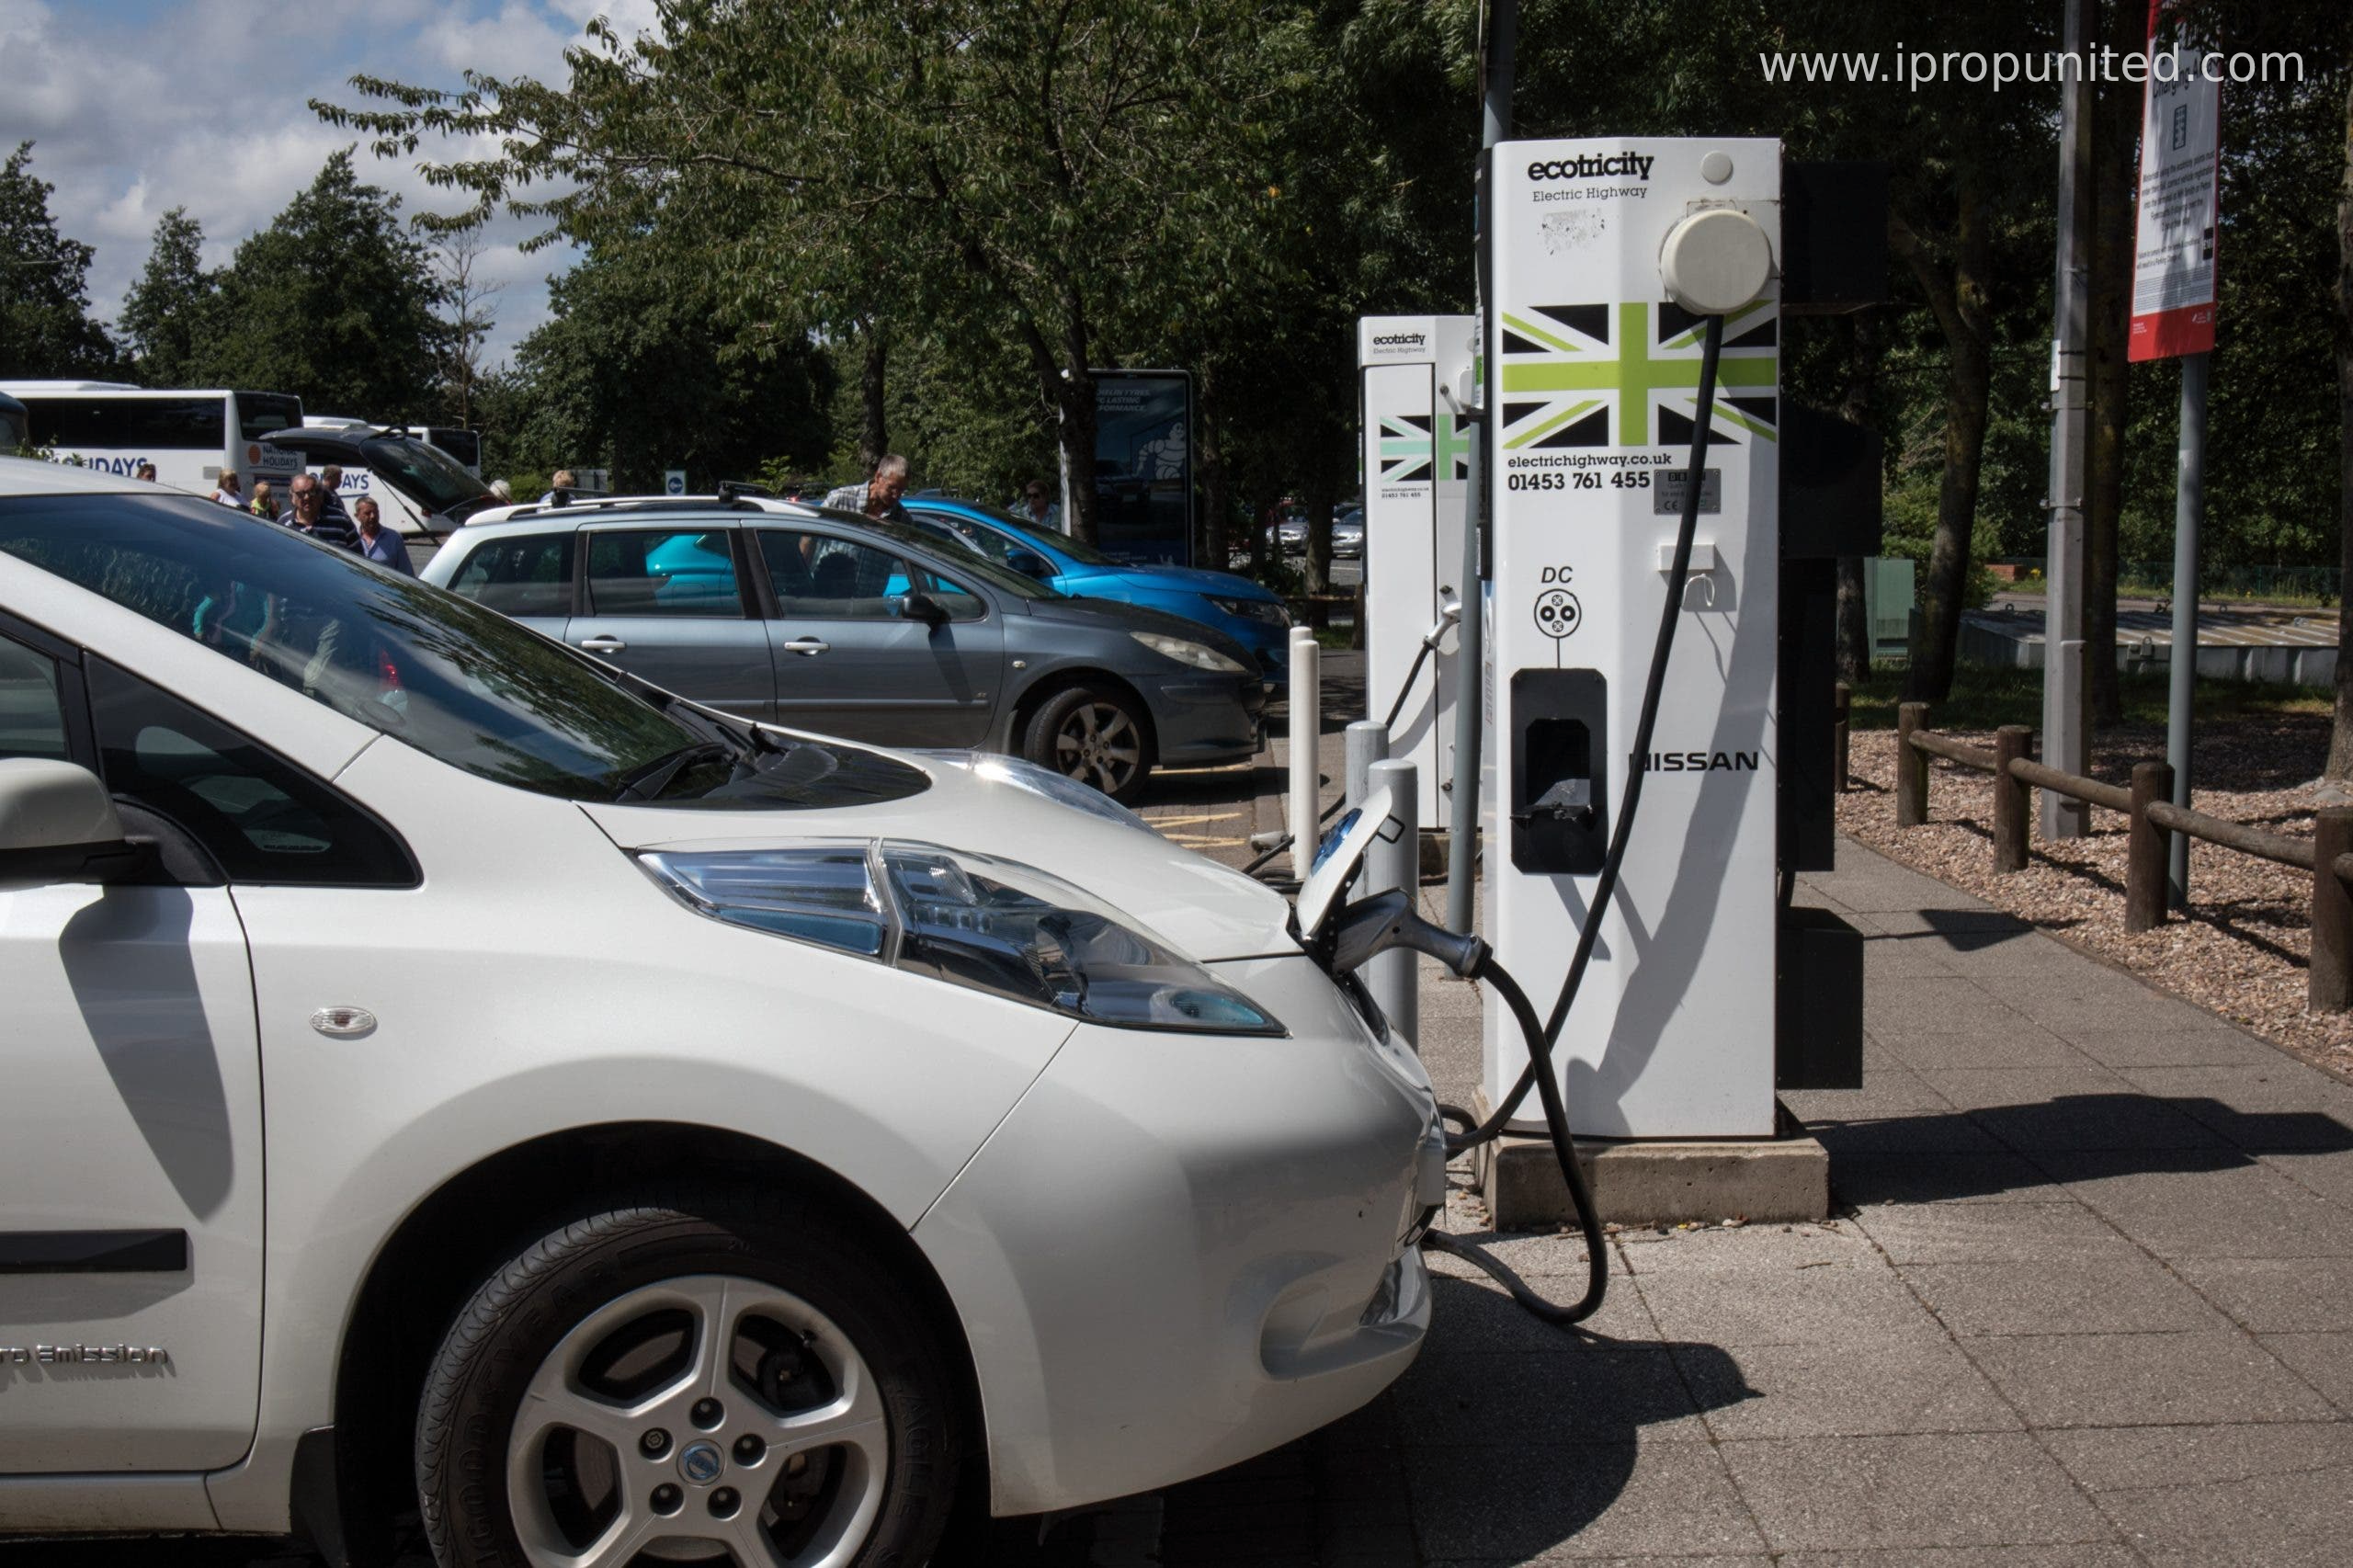 New buildings to come with compulsory electric car charging points in the UK